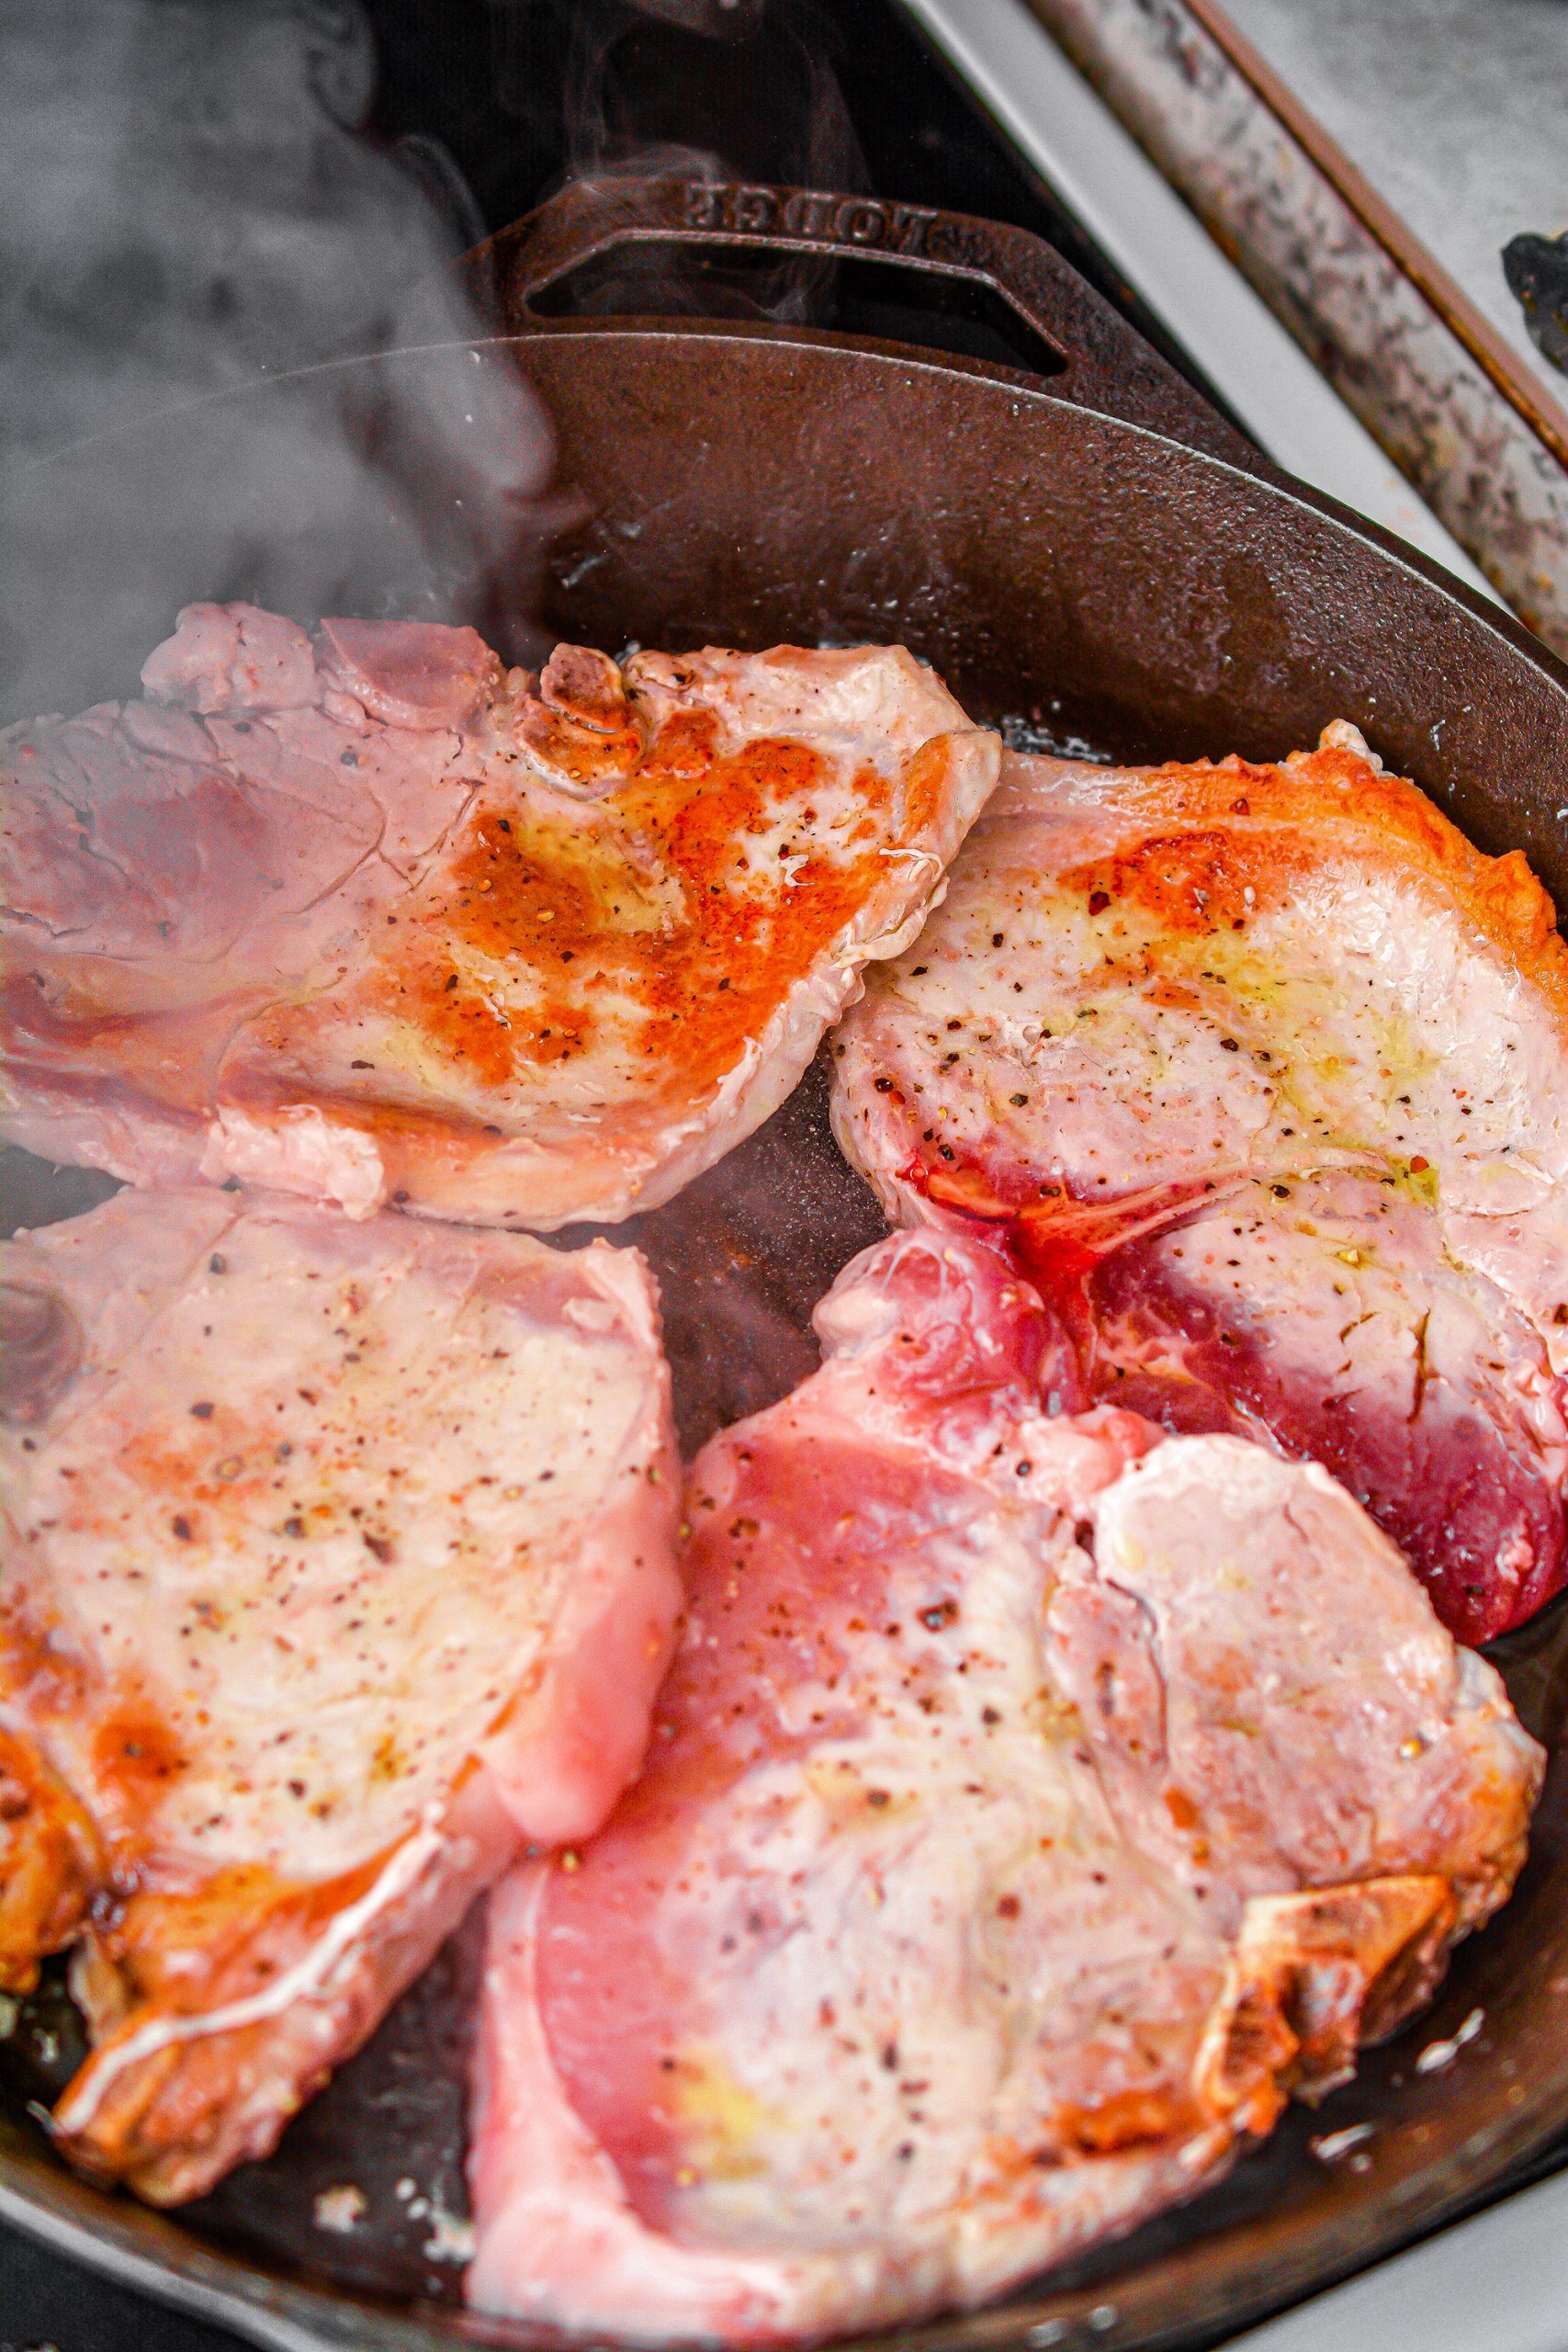 Heat the oil in a skillet over medium-high heat and sear both sides of the pork chops. Remove and set aside.